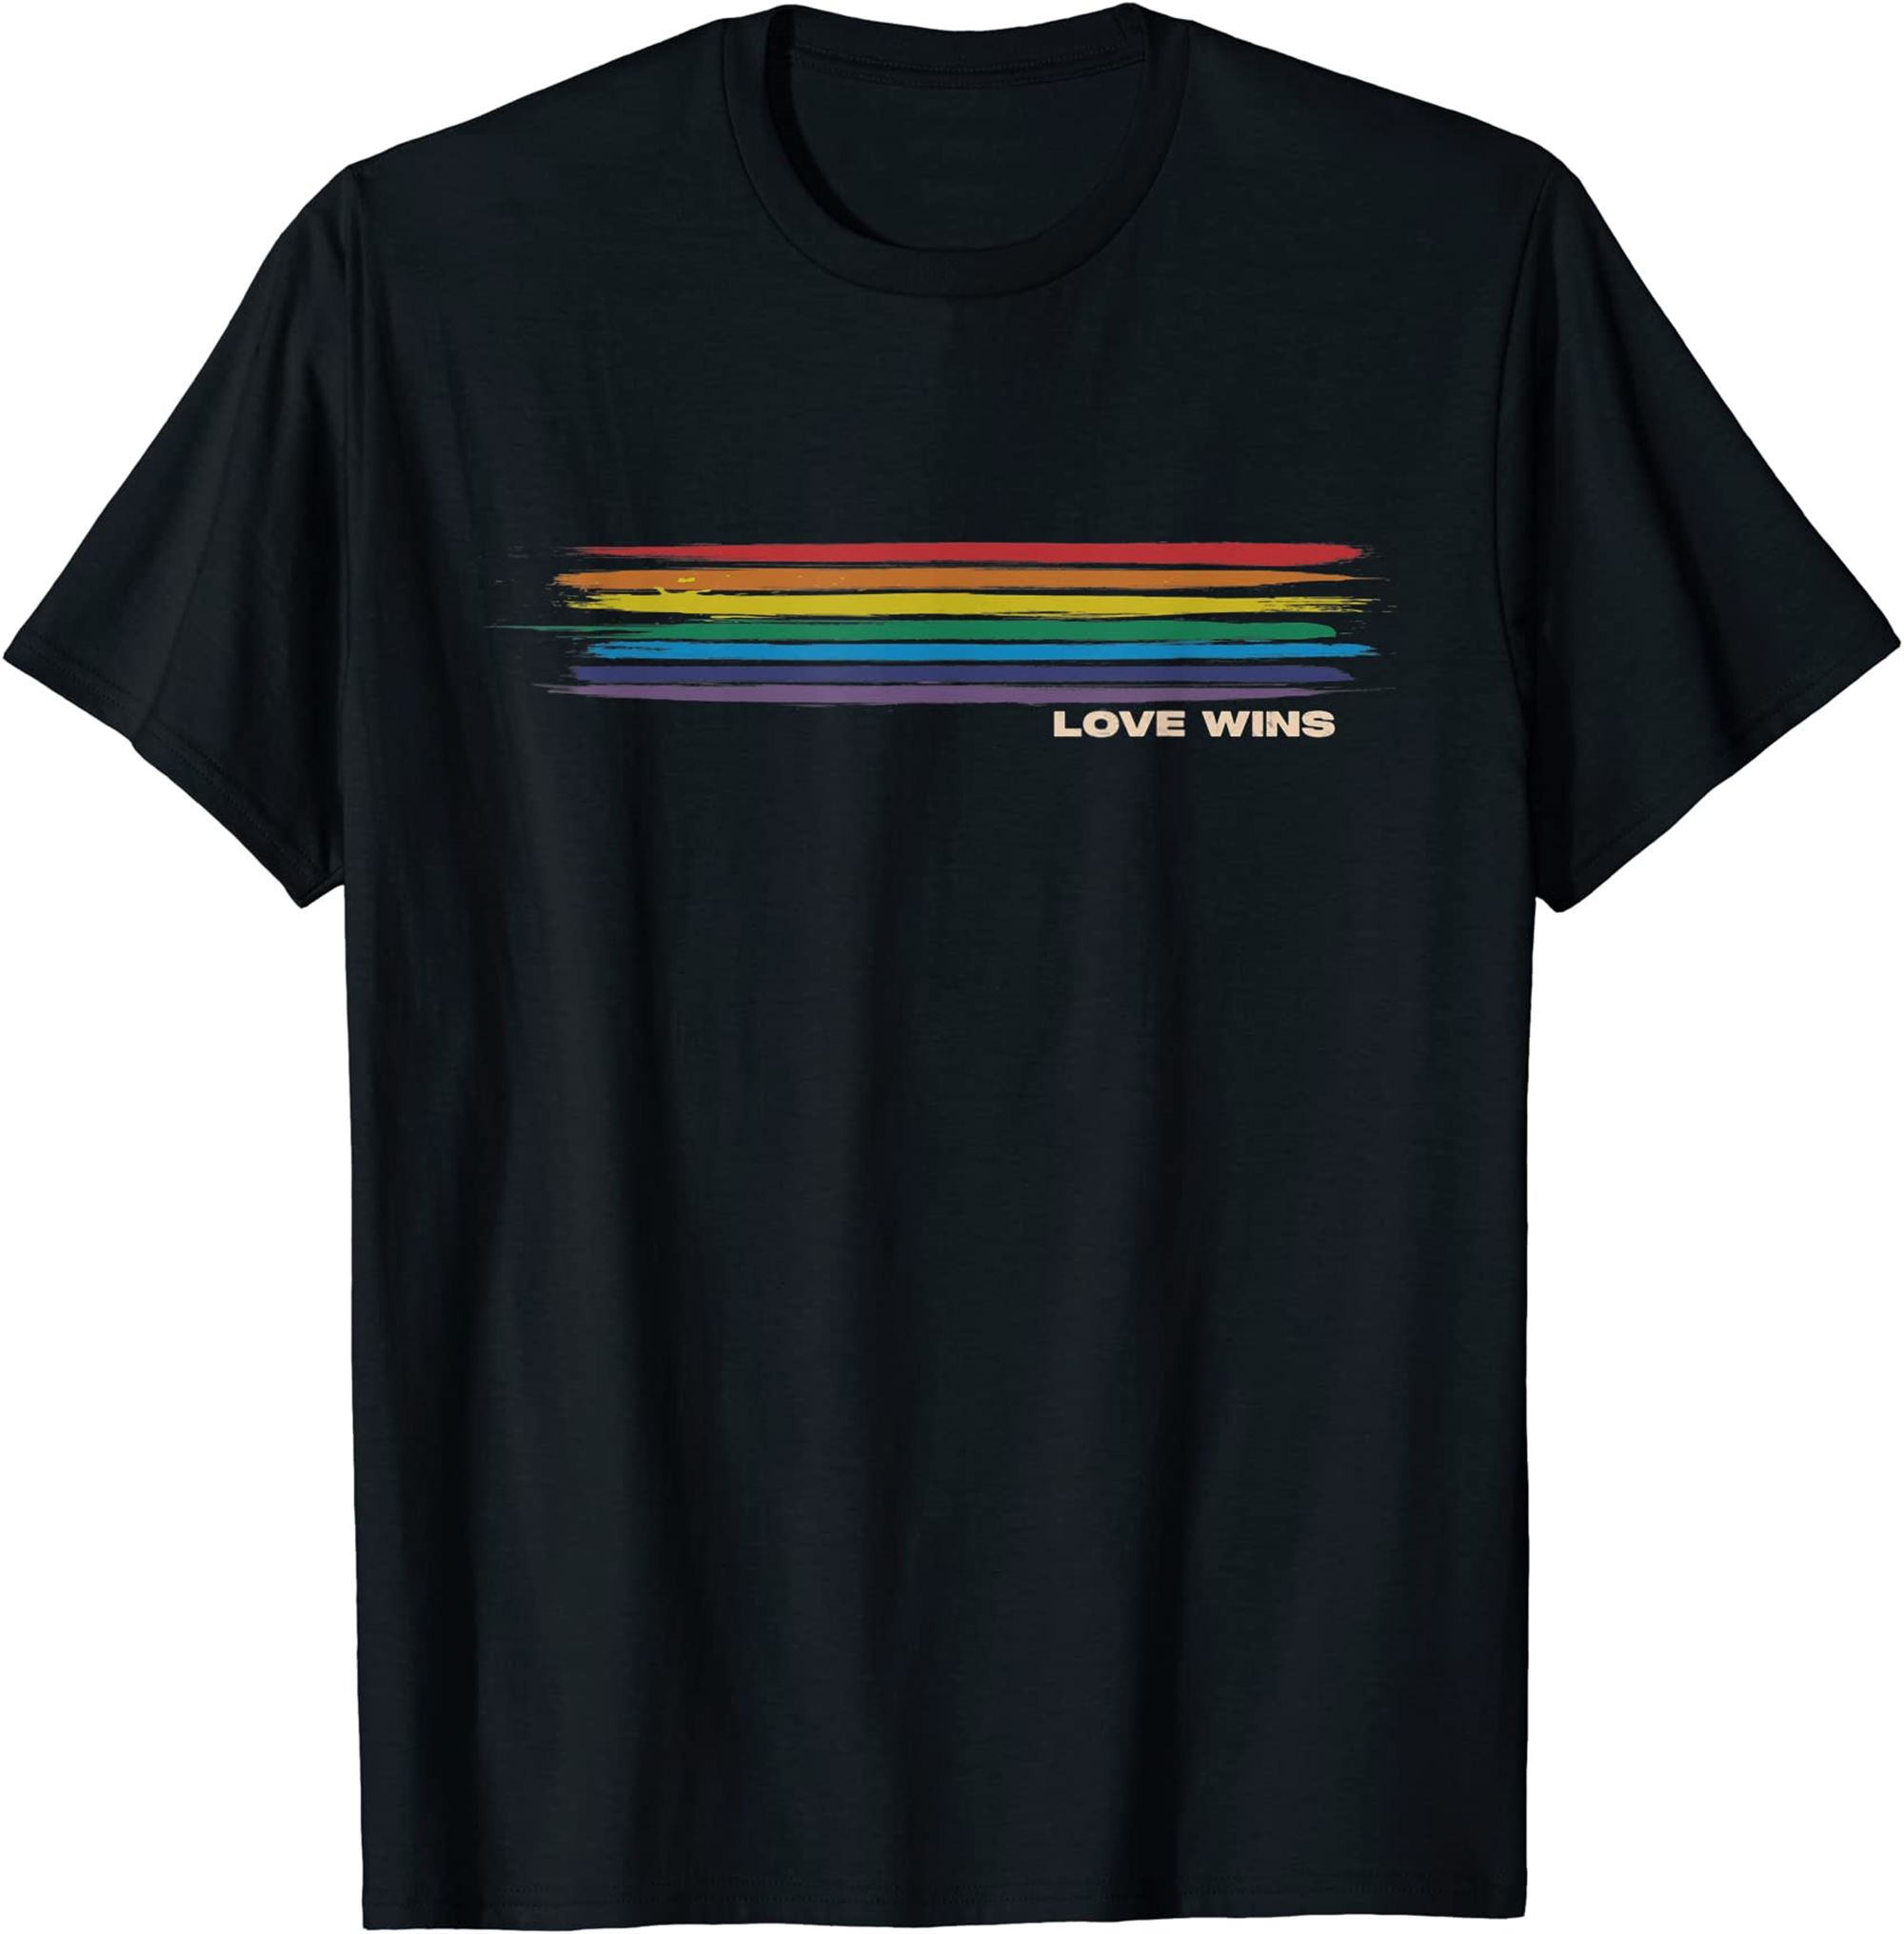 Love Wins Be Yourself Month Rainbow Lgbtq Equality Gay Pride T-shirt Plus Size Up To 5xl